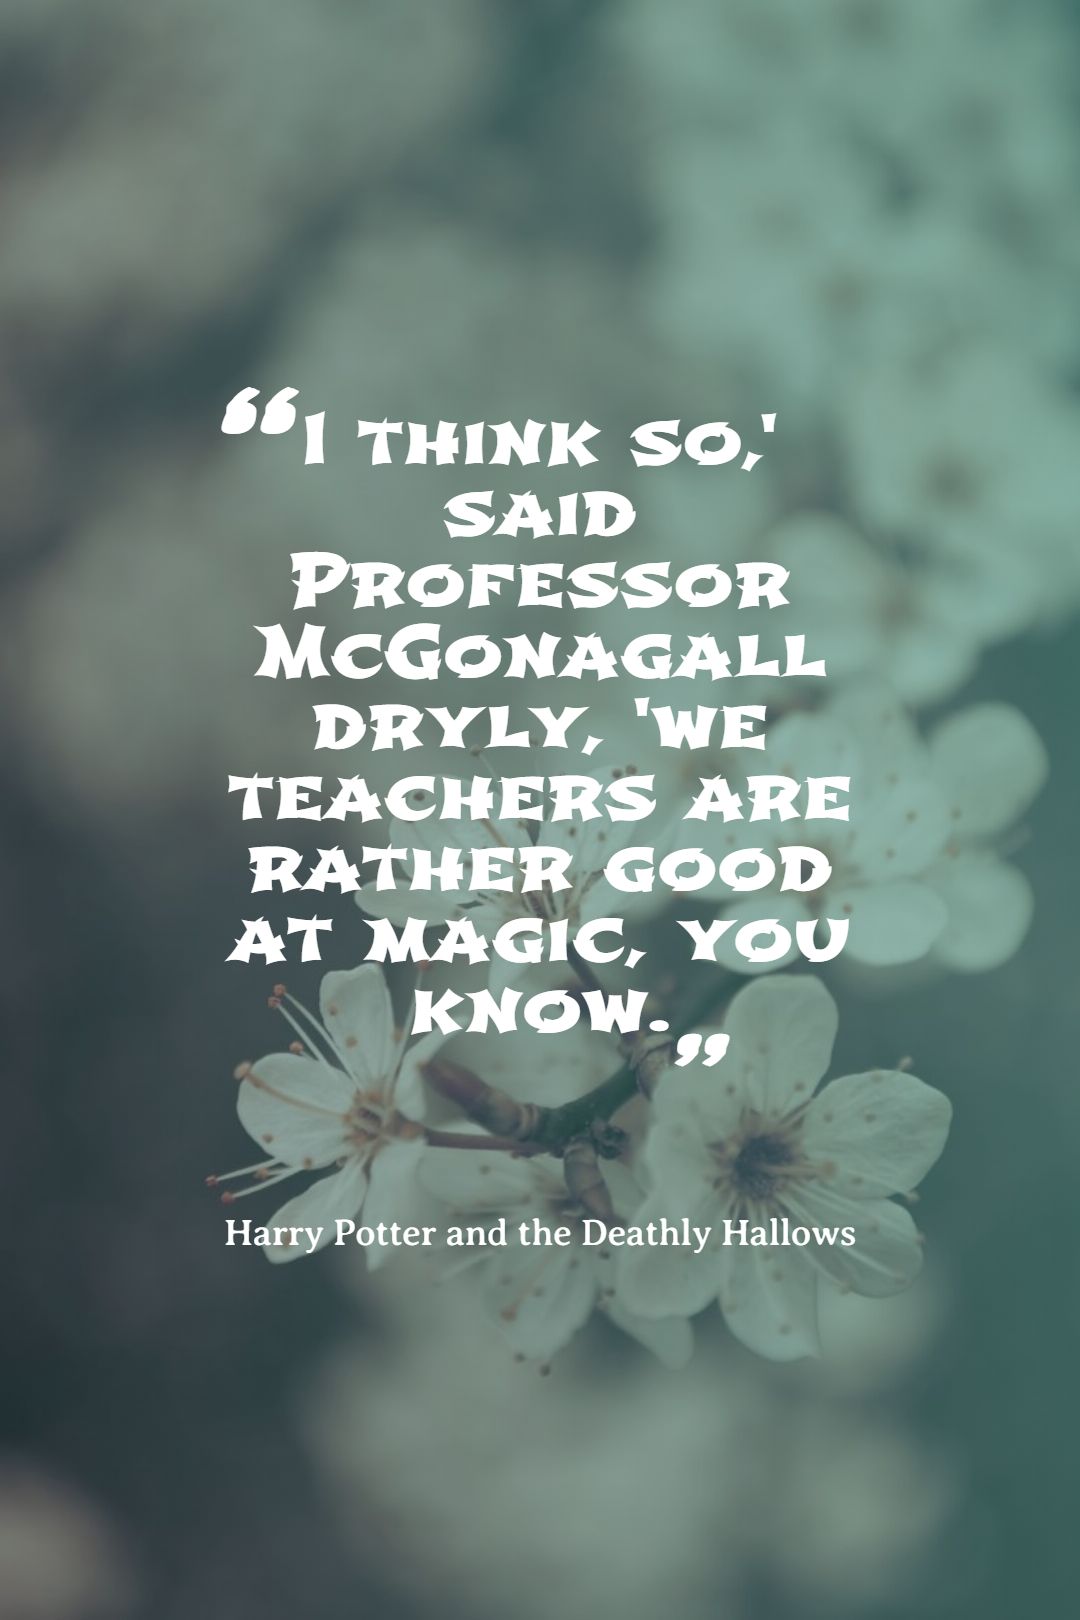 I think so said Professor McGonagall dryly we teachers are rather good at magic you know.